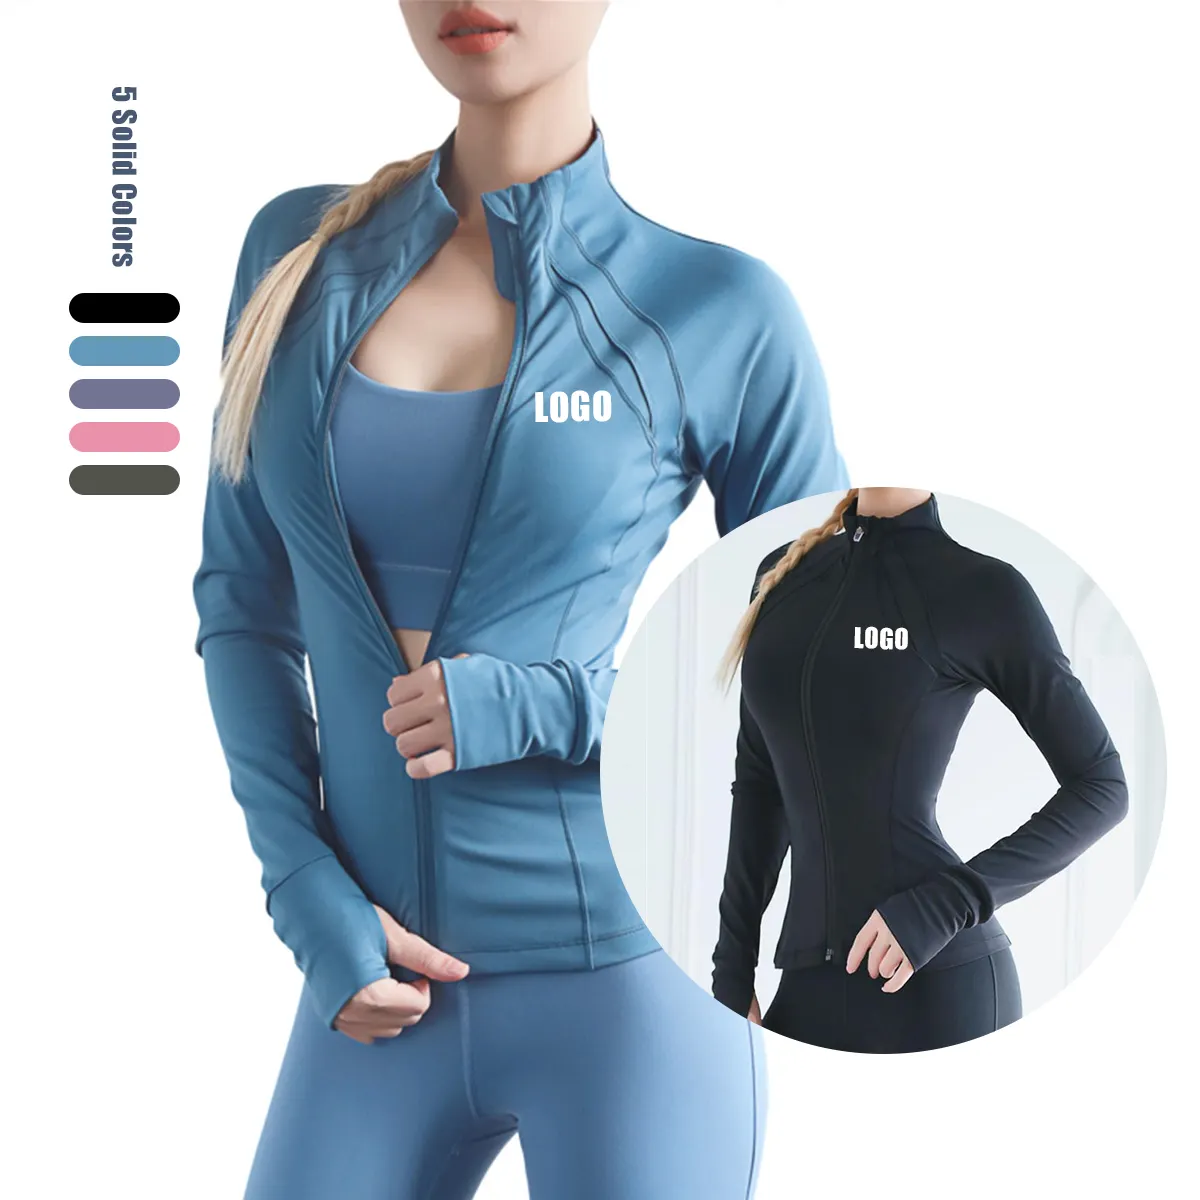 Stretchy Women Slim Fit Workout Yoga Track Jackets Full Zip Warm up Active Running Jacket Sport Coat with Thumb Holes